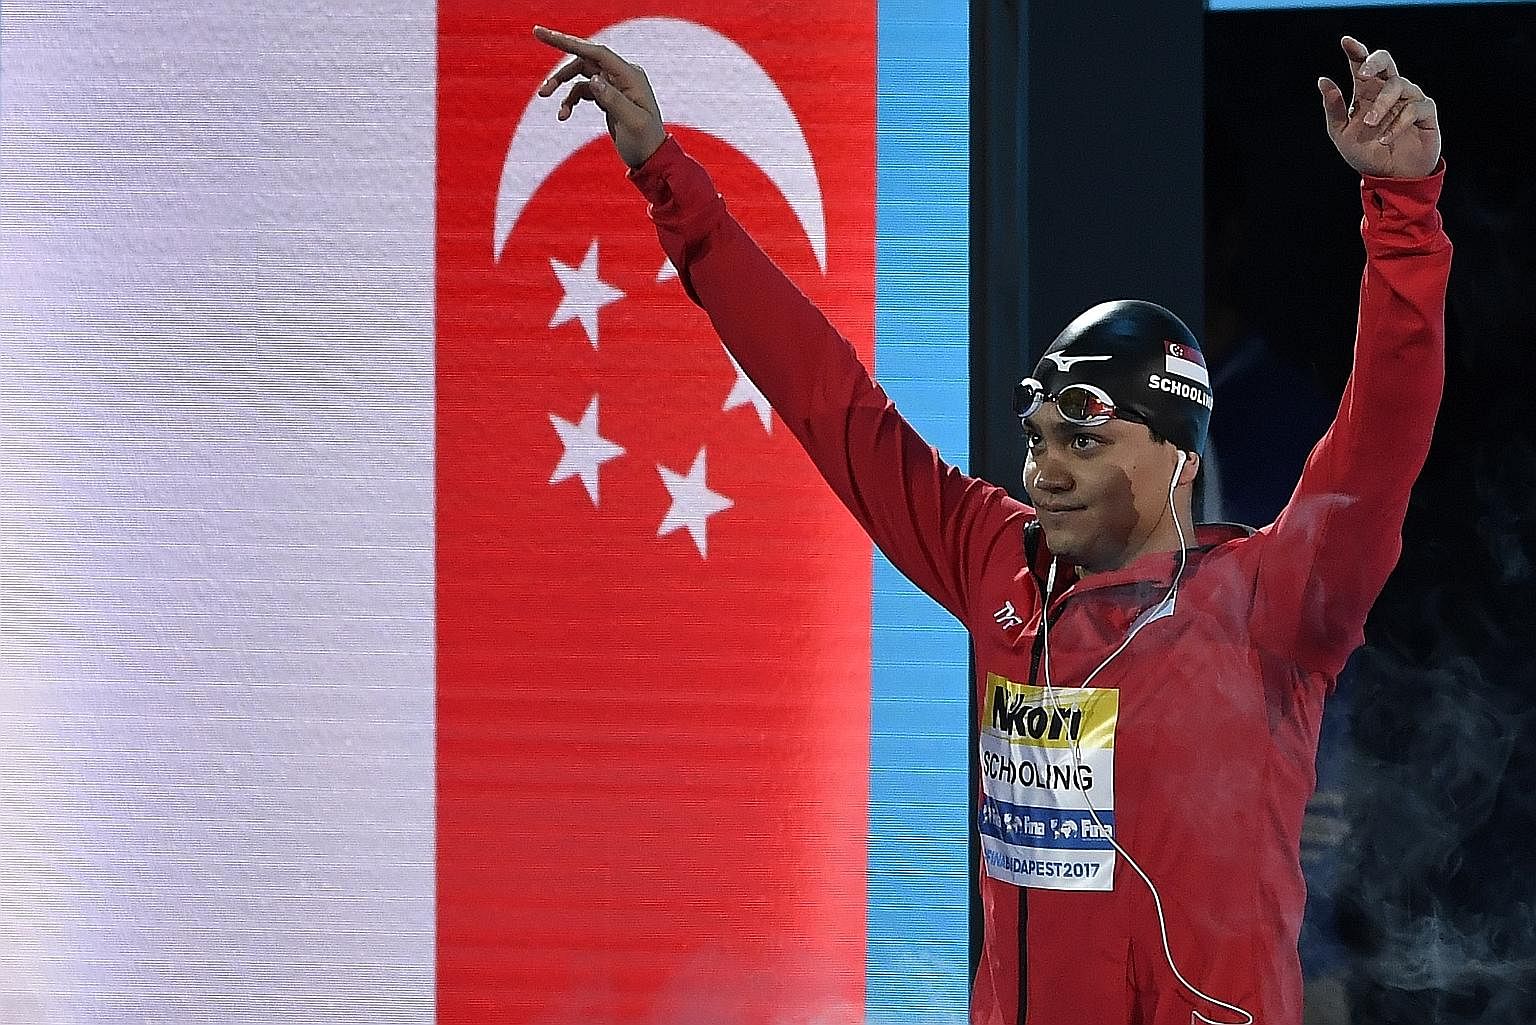 Joseph Schooling before the men's 100m butterfly final in Budapest, Hungary last year, when he clocked 50.83sec to finish joint-third with Briton James Guy, behind winner Caeleb Dressel.